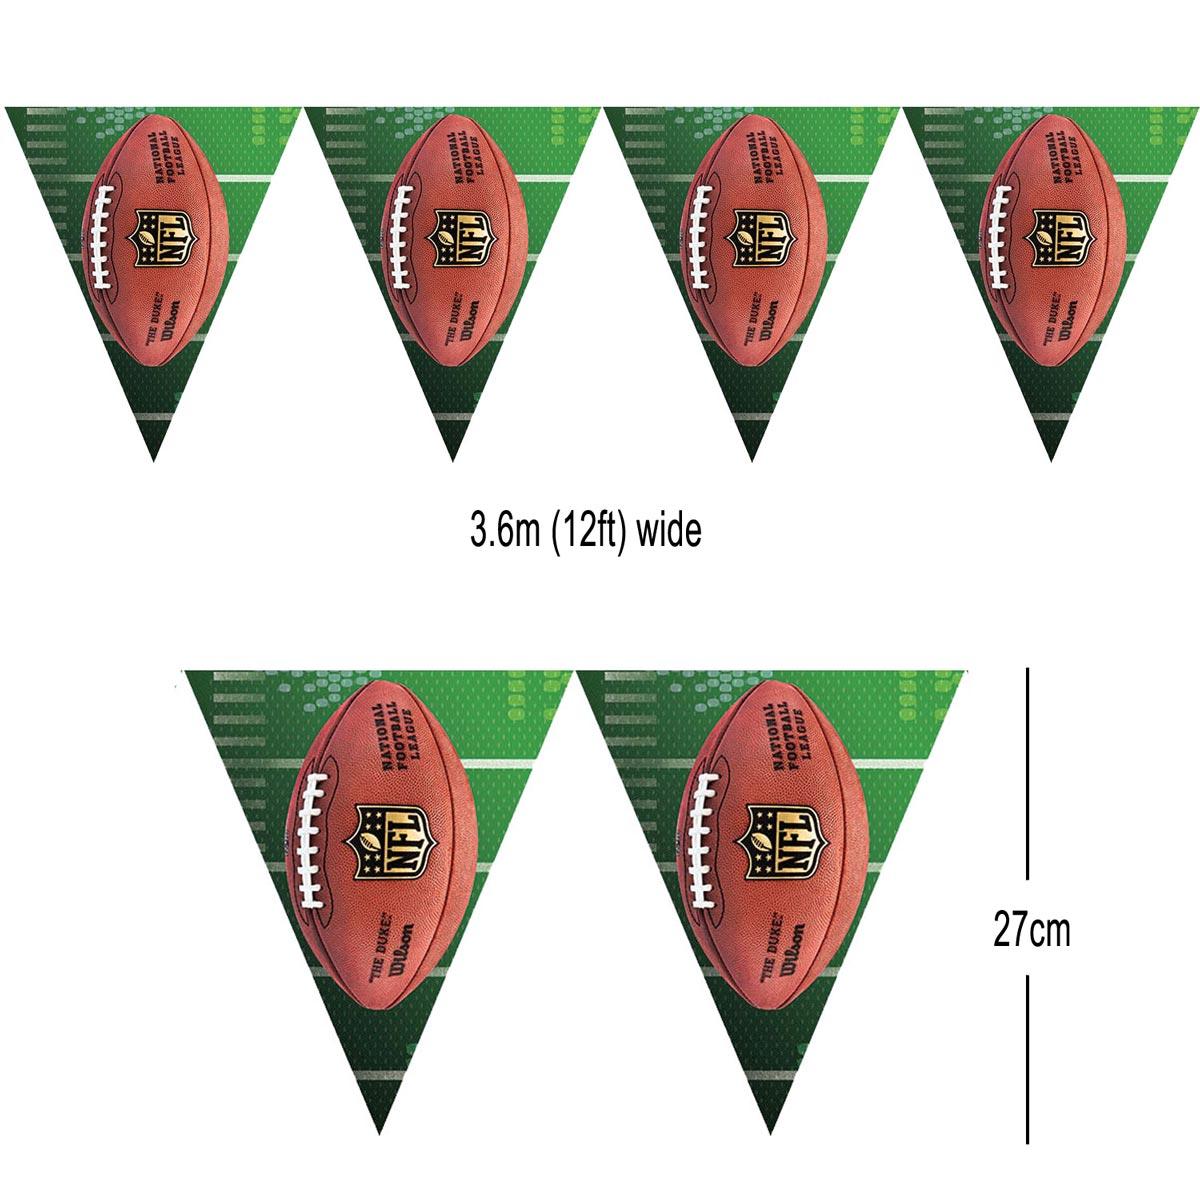 American Football NFL Pennant Bunting (12ft) by Amscan 123469 available here at Karnival Costumes online party shop